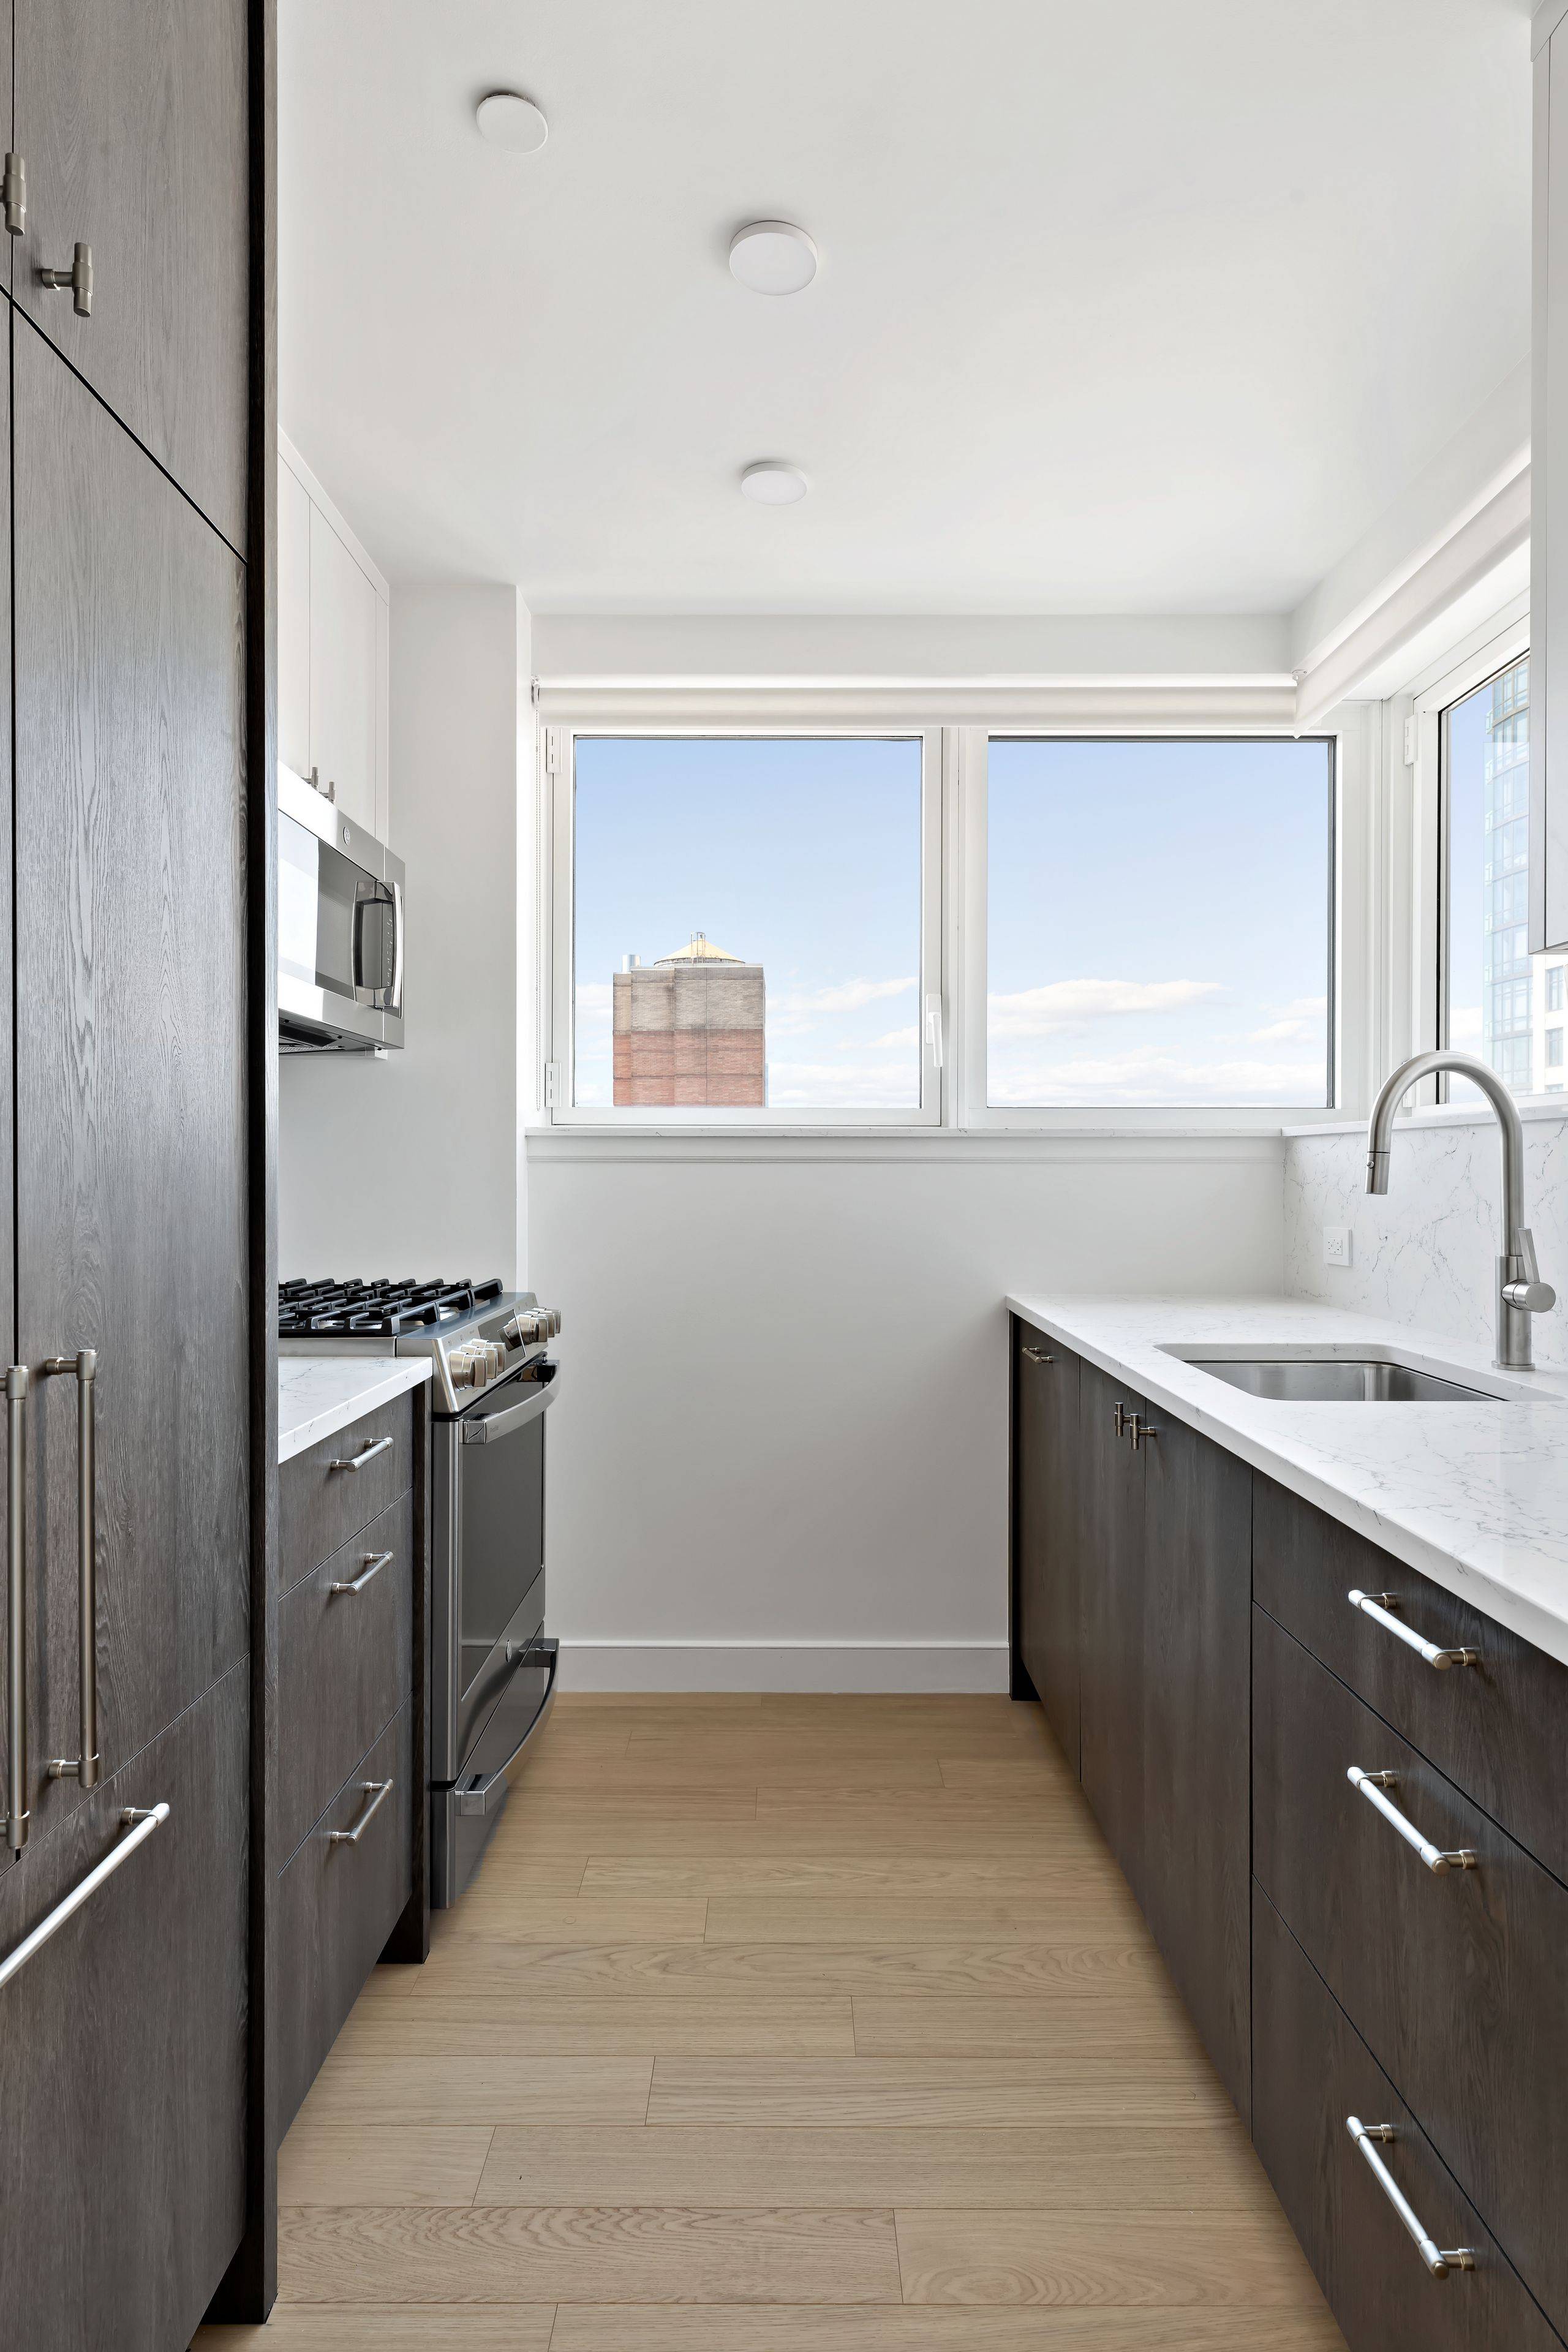 Introducing newly renovated apartment homes featuring top of the line appliances, countertops, and hardwood flooring.